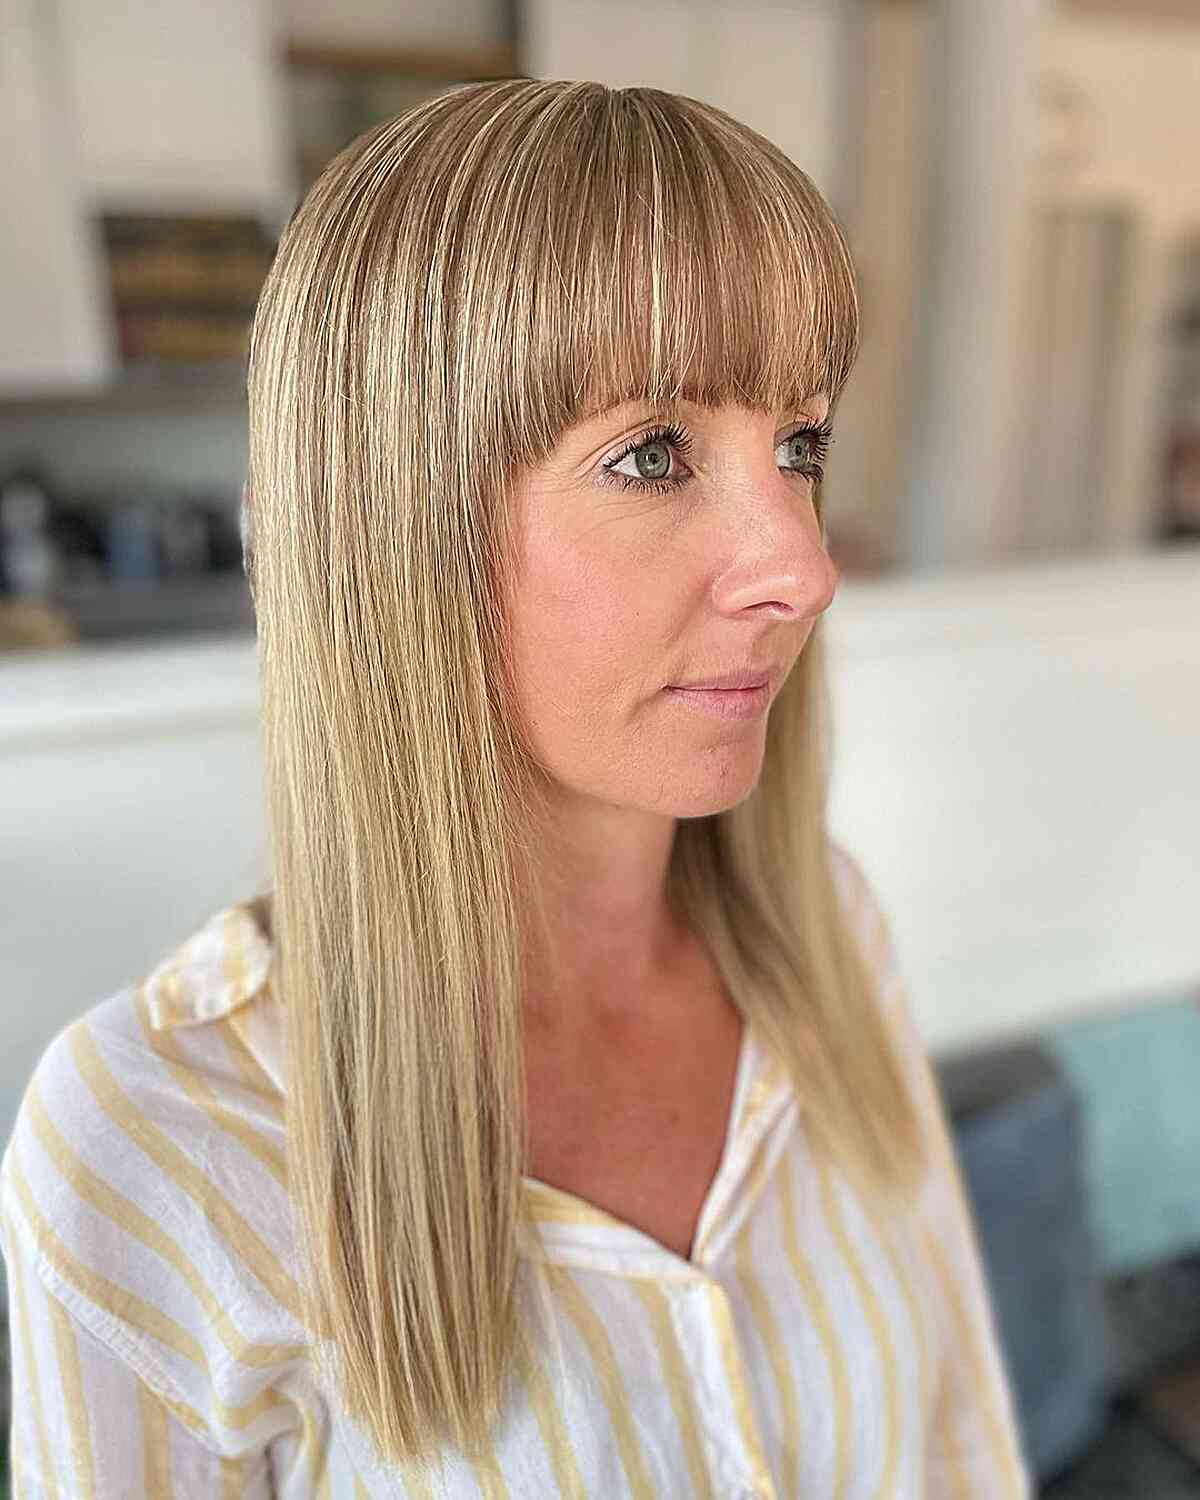 Medium-Length Straight Hair with Natural Blonde Tones